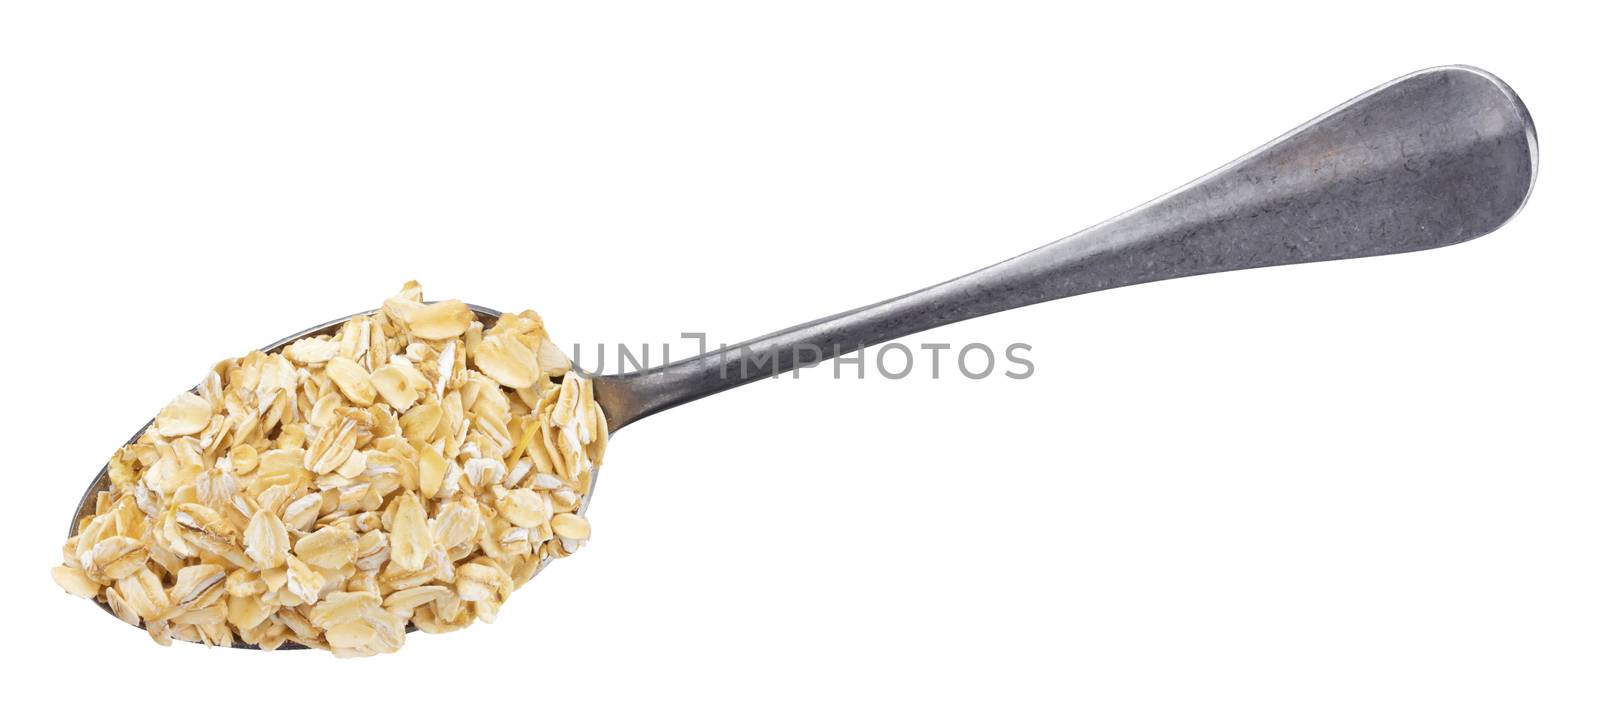 Oat flakes in spoon isolated on white background. Top view by xamtiw